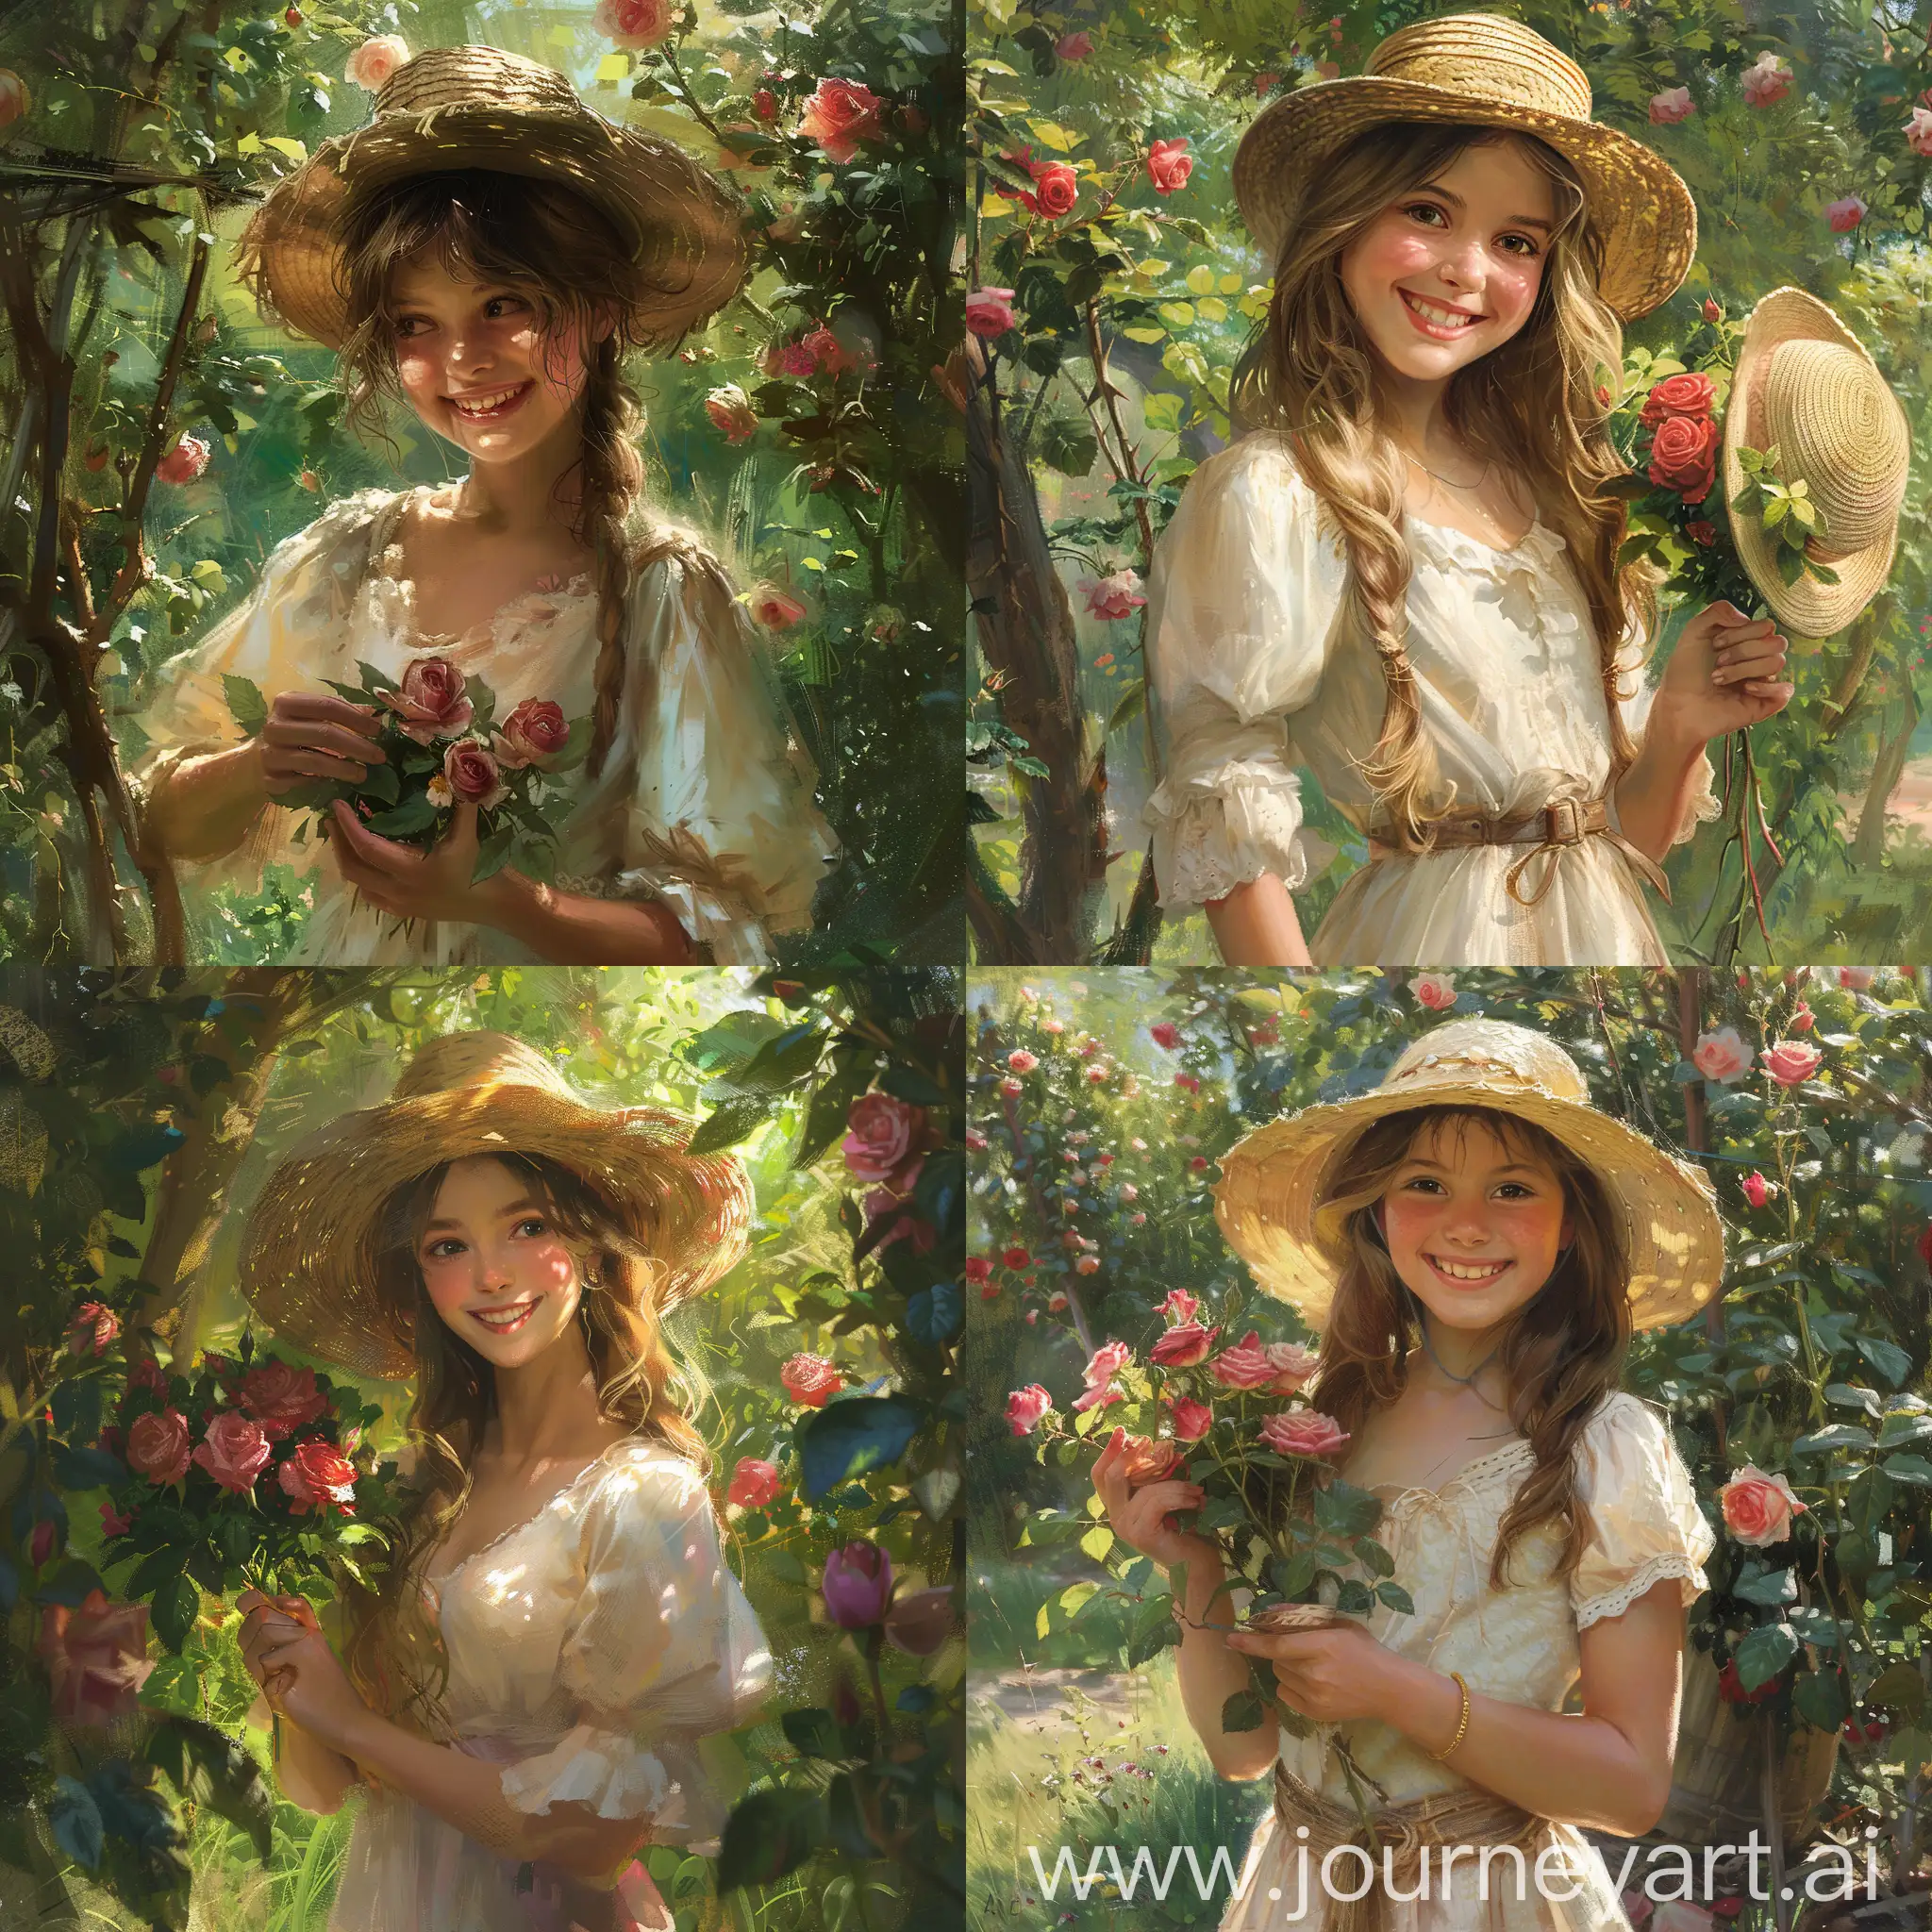 Graceful-Girl-Holding-Roses-in-Garden-with-Straw-Hat